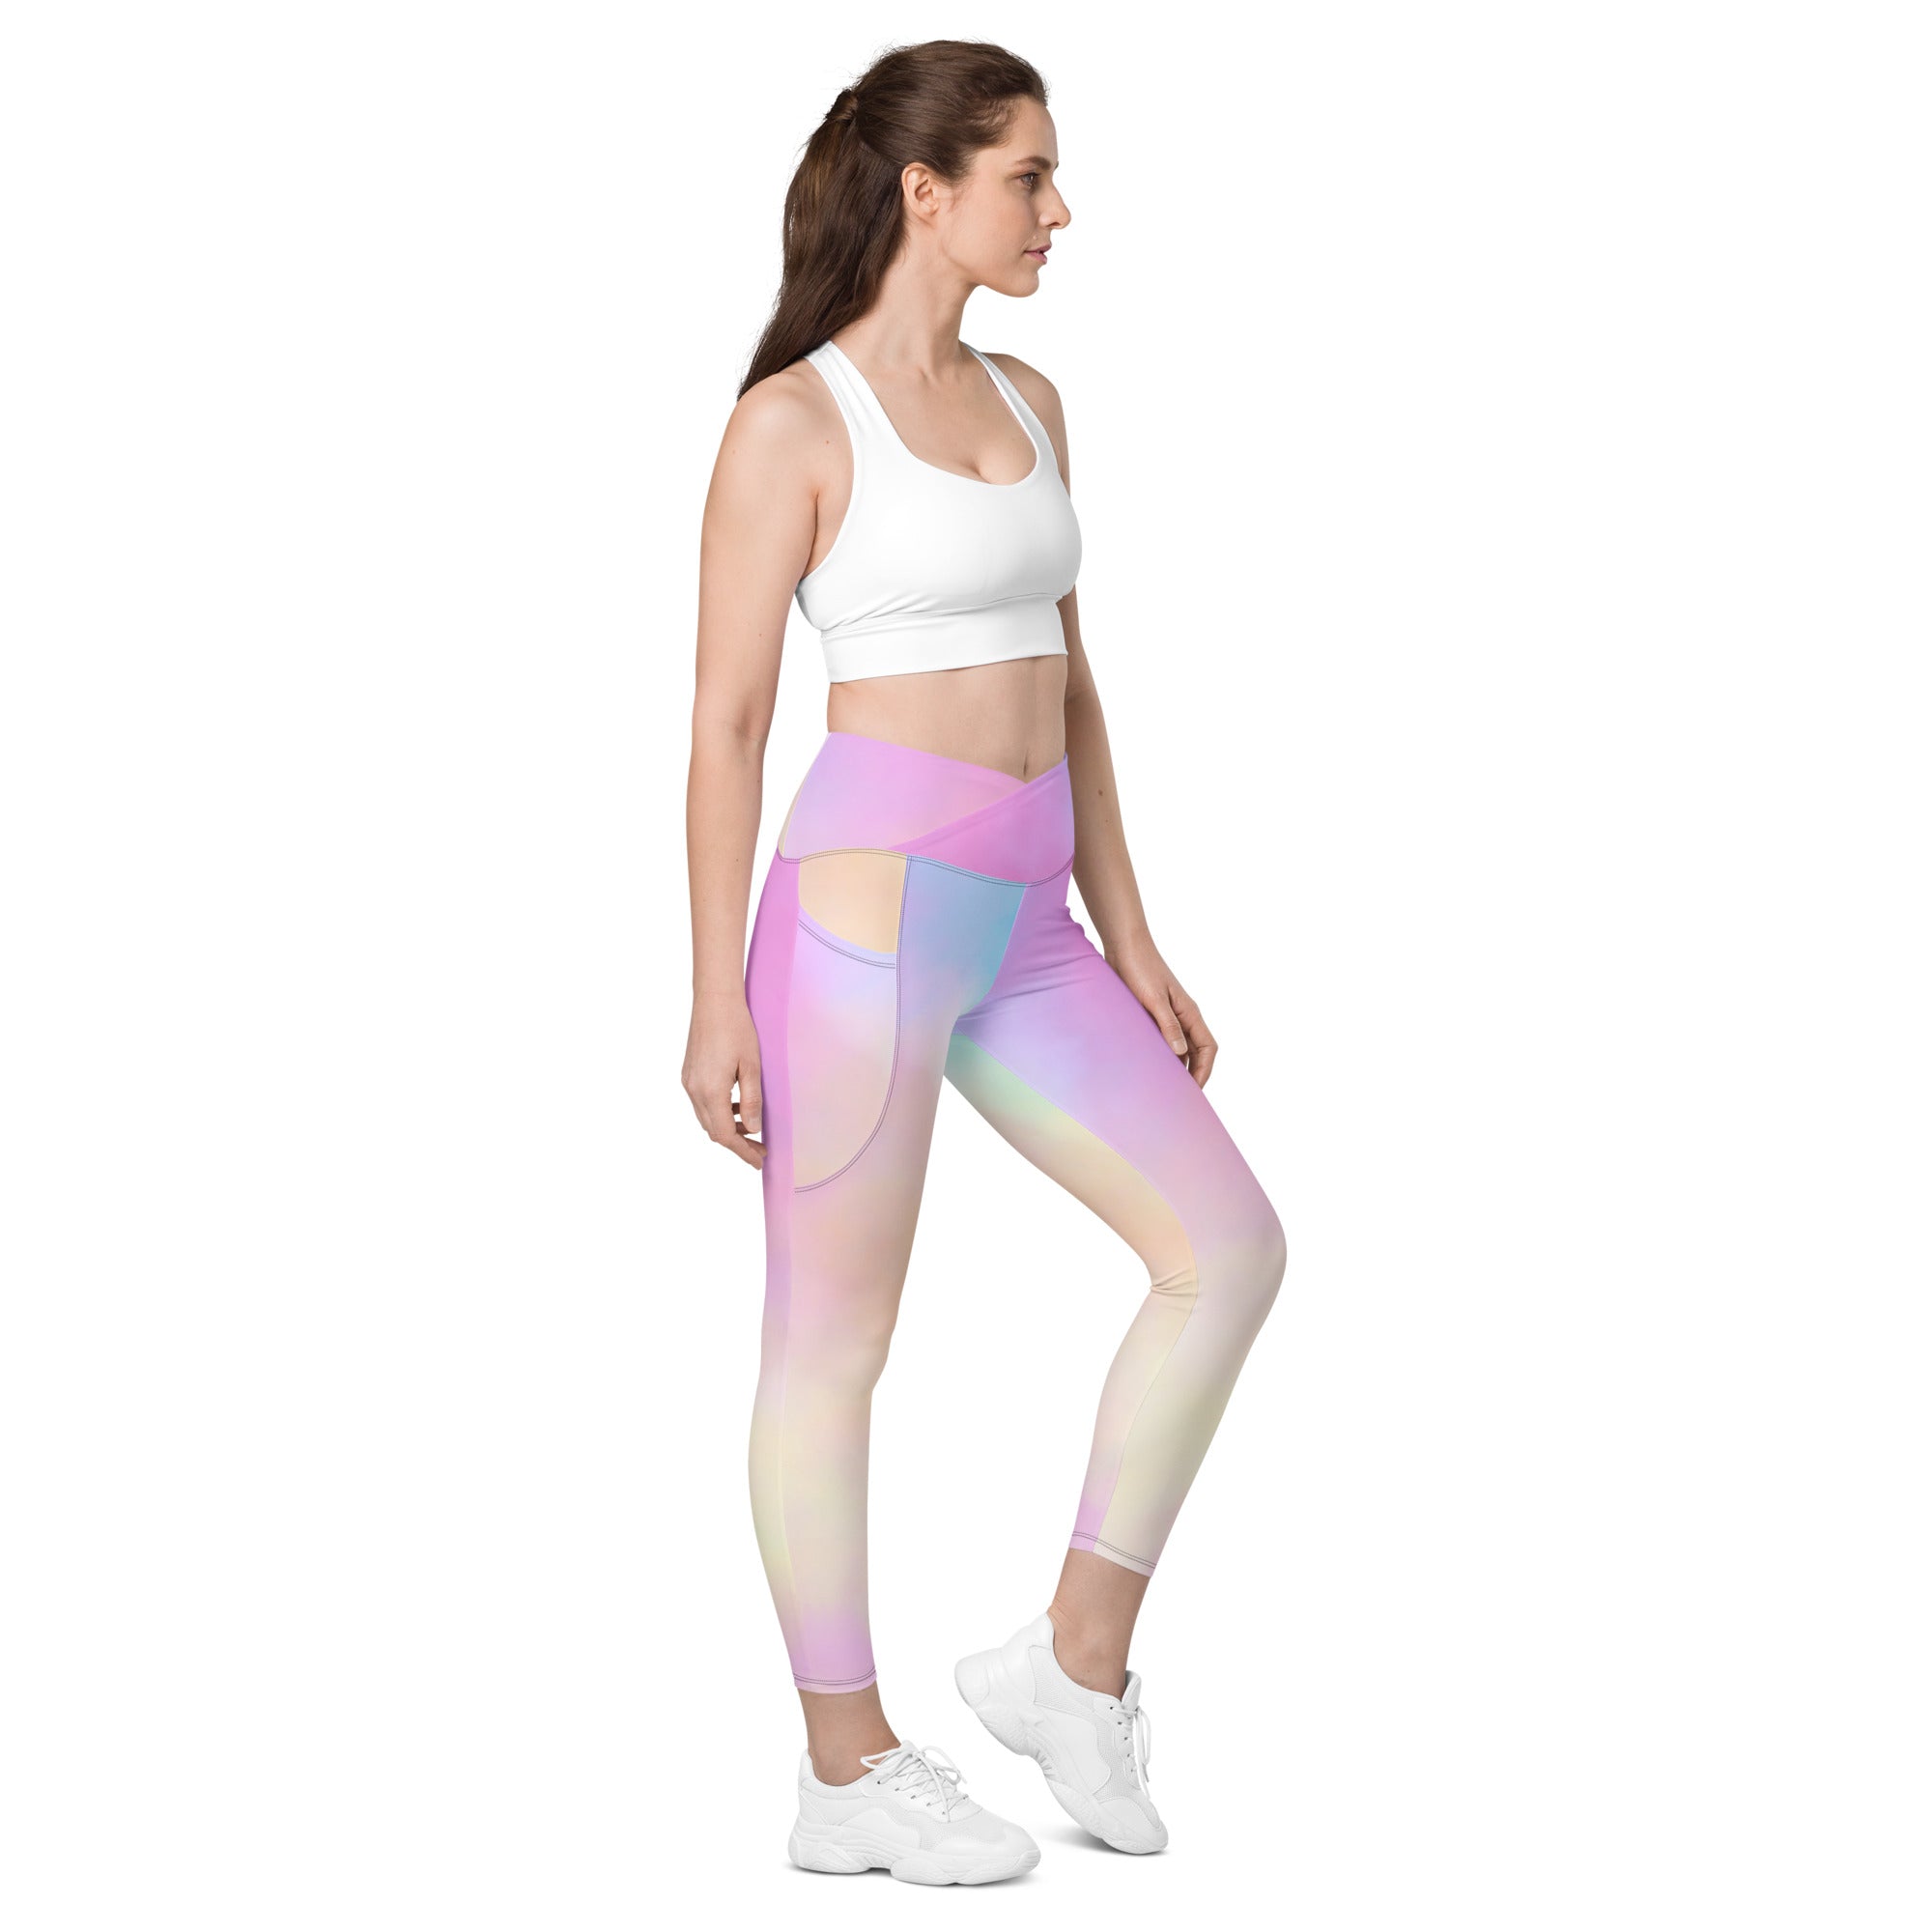 Cotton Candy Crossover leggings with pockets